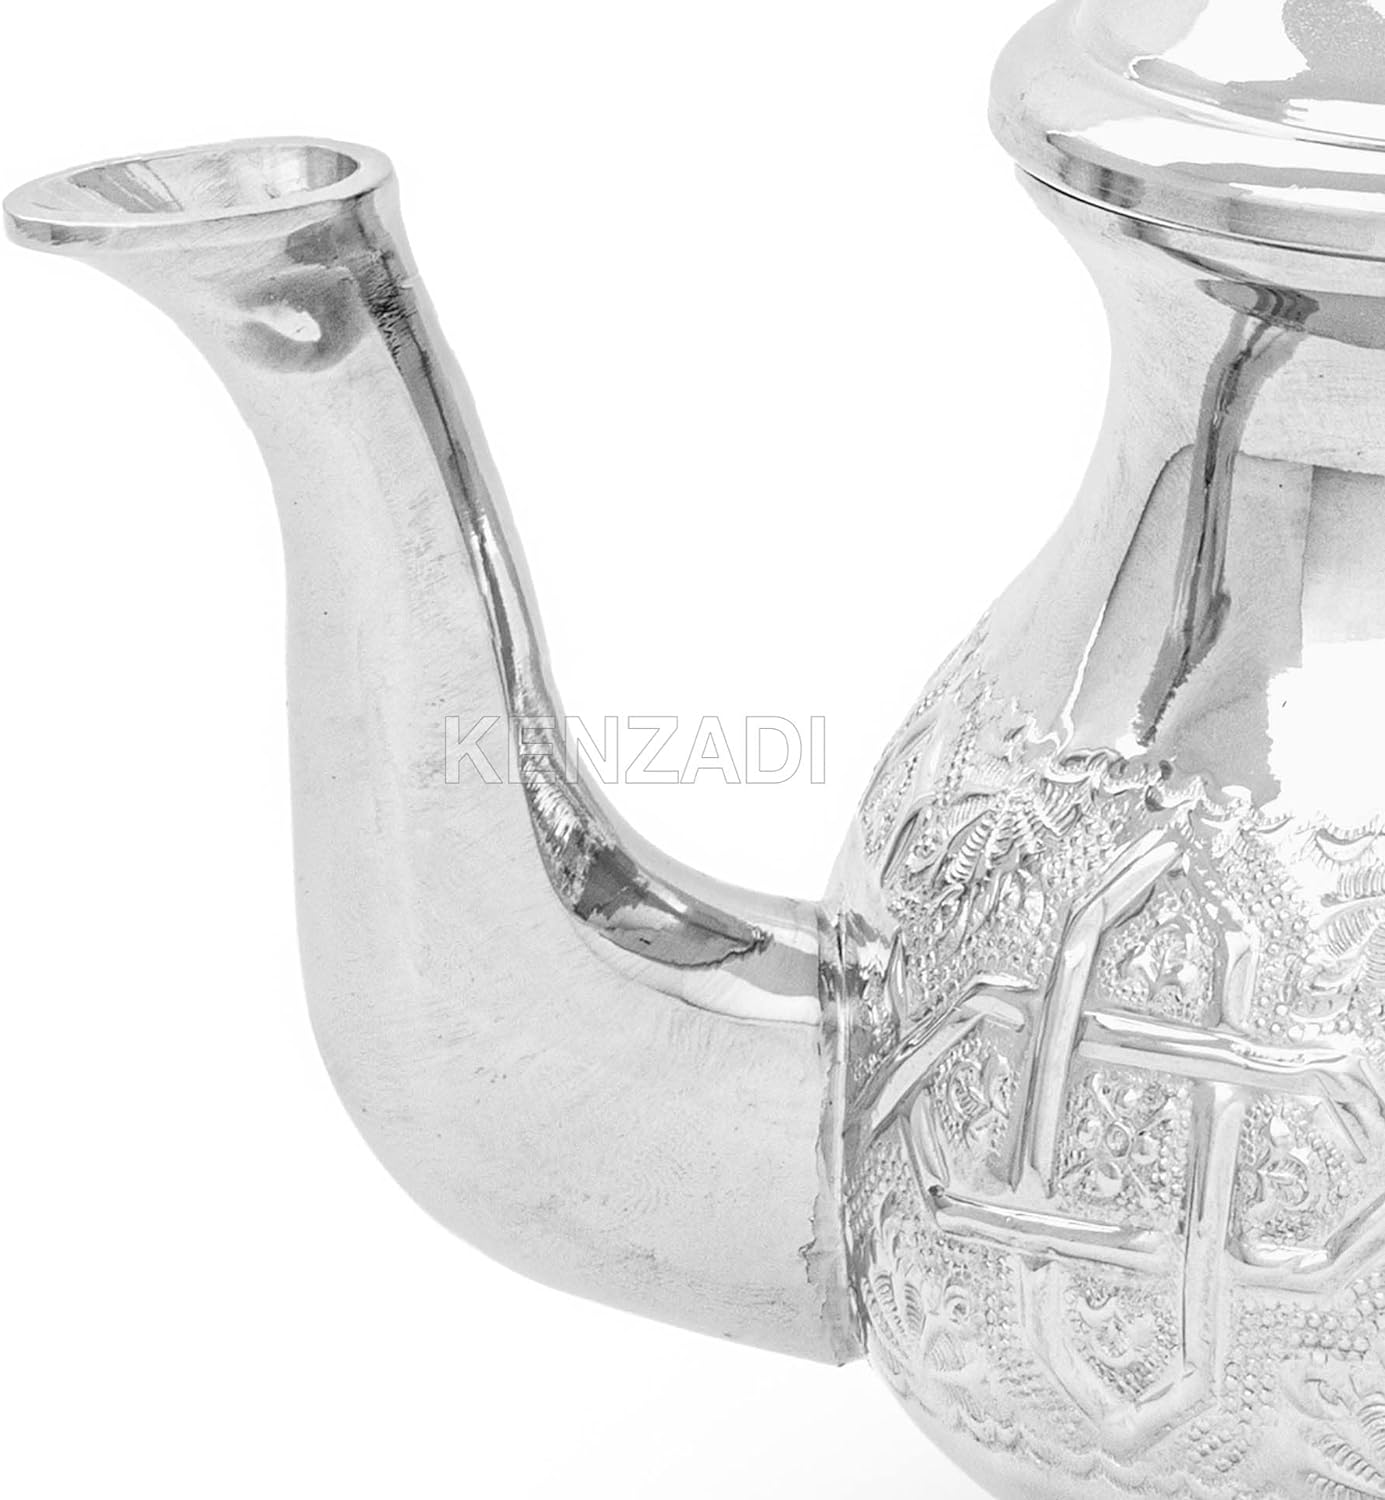 Moroccan 8Cups 20oz Teapot Handmade Brass Silver Plated Hand Carved In Fes Morocco - Handmade by My Poufs